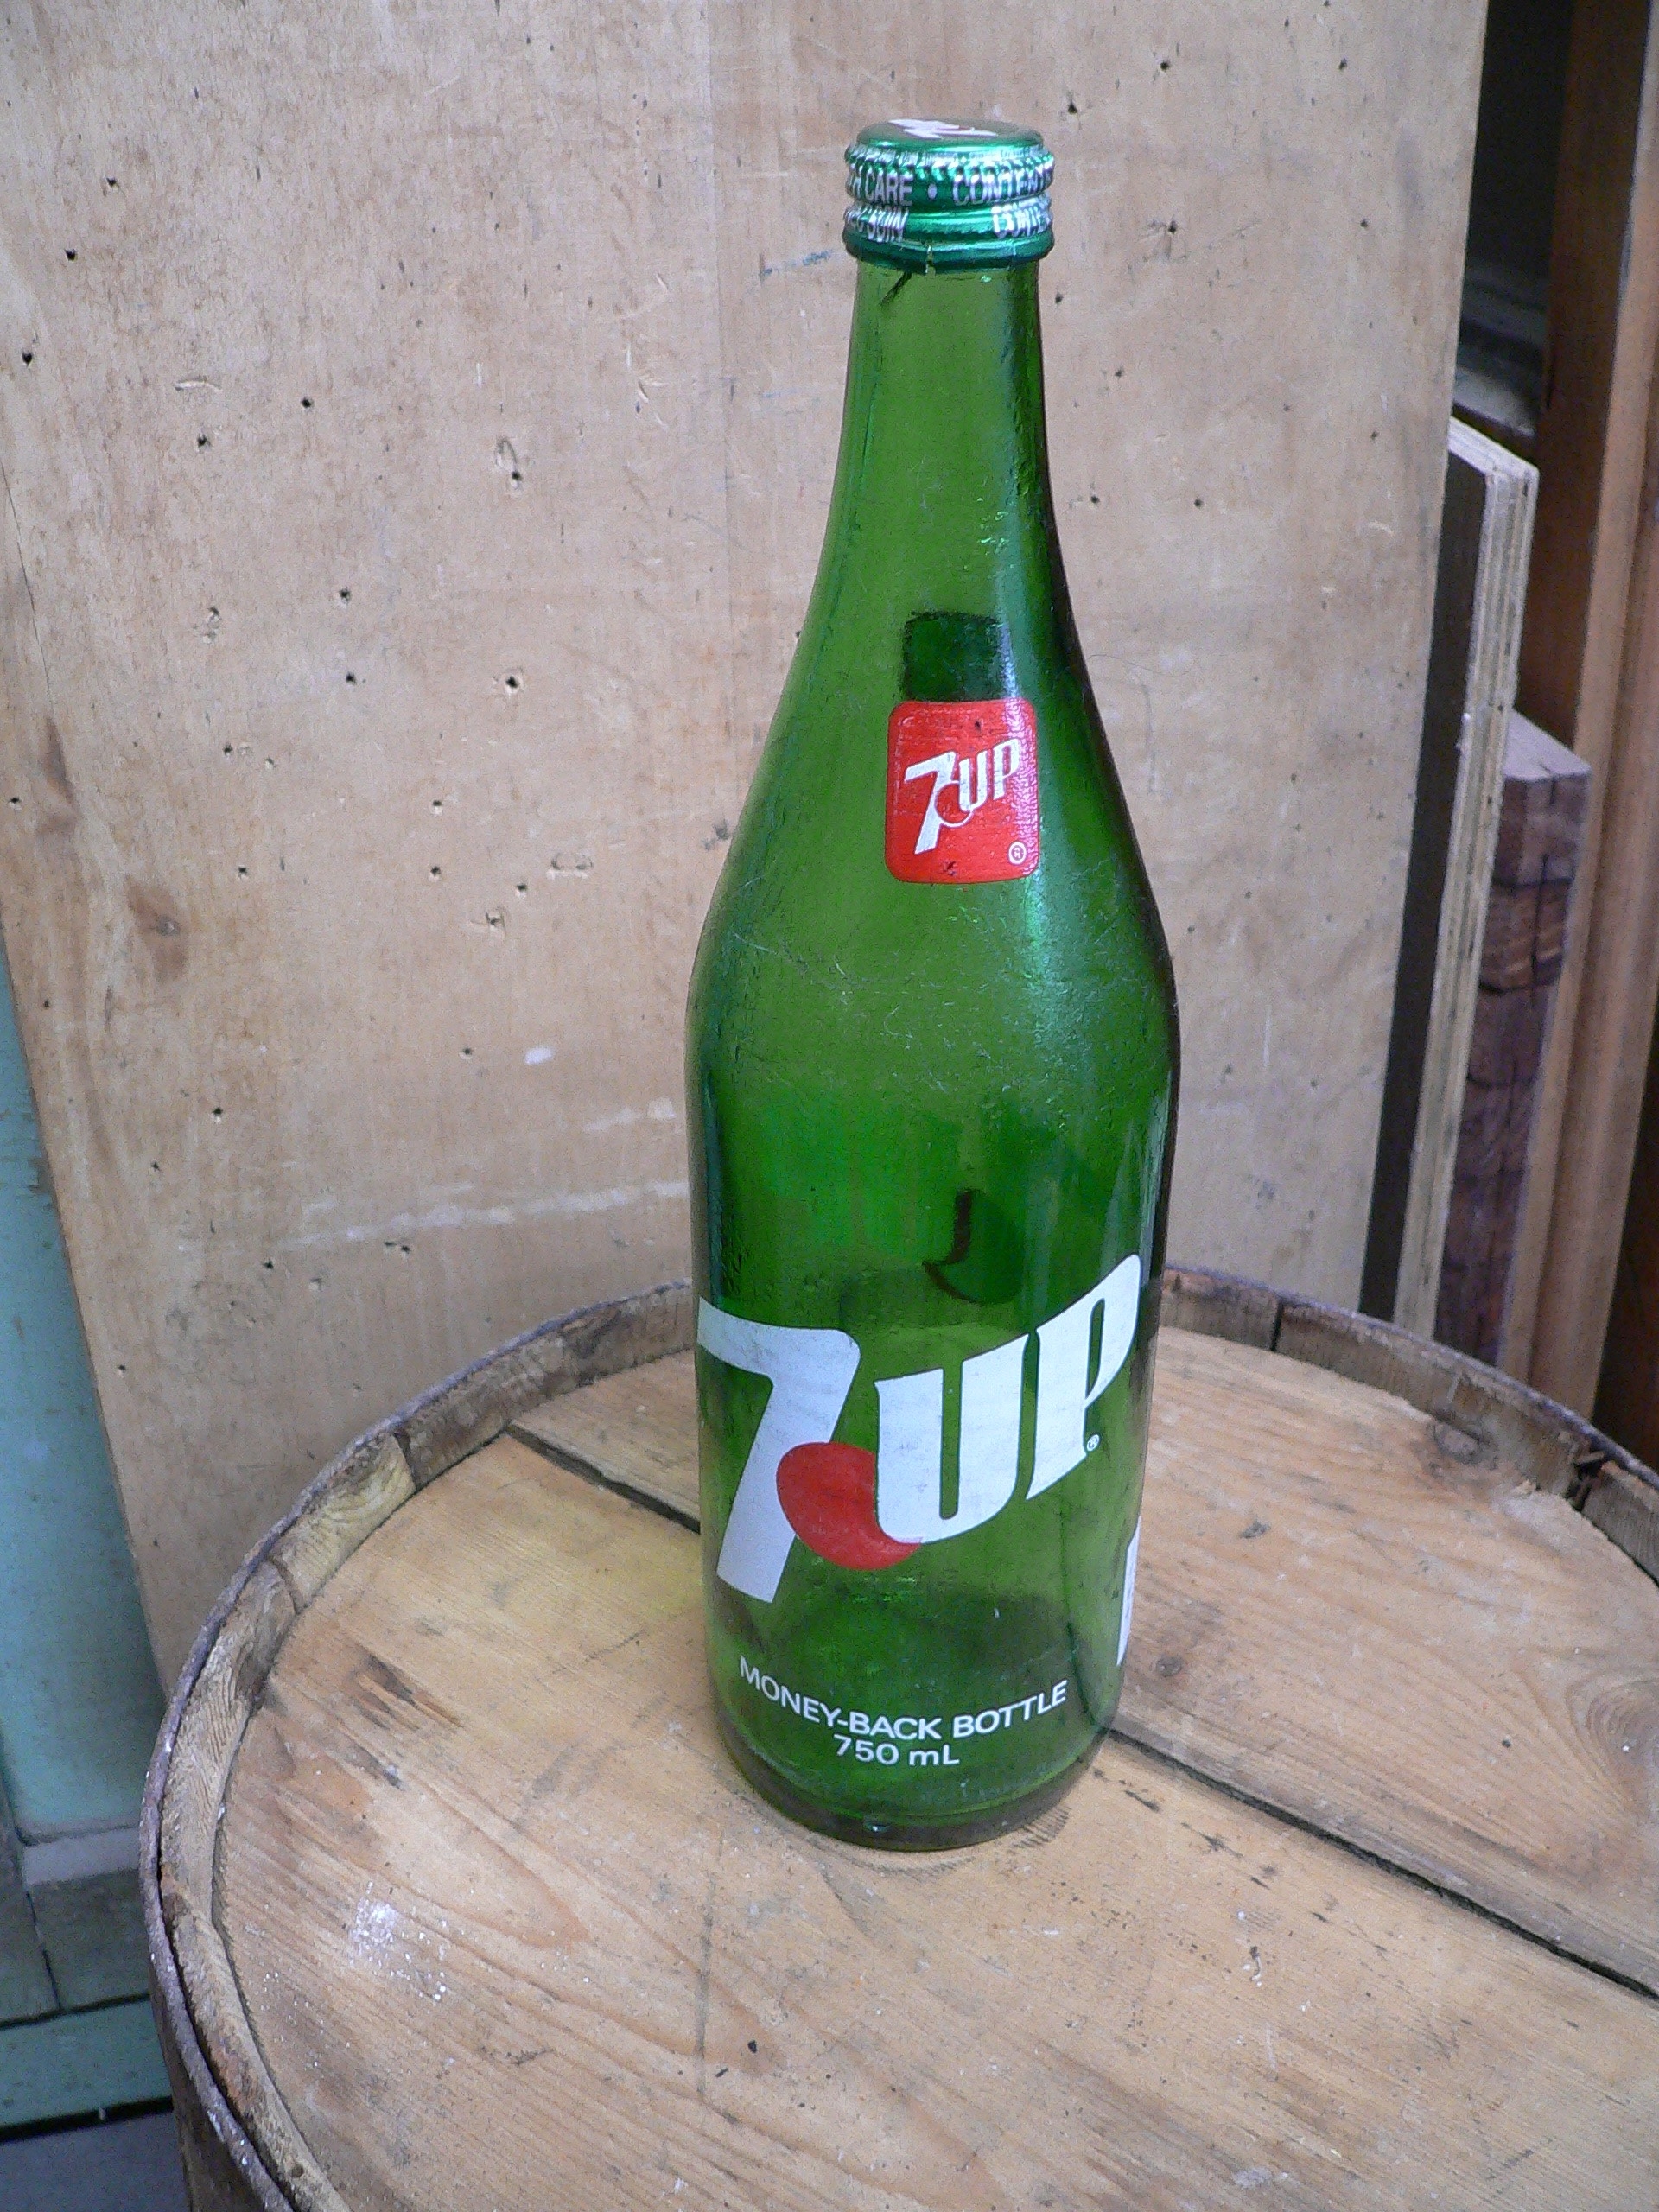 Bouteille 7 up # 6680.3